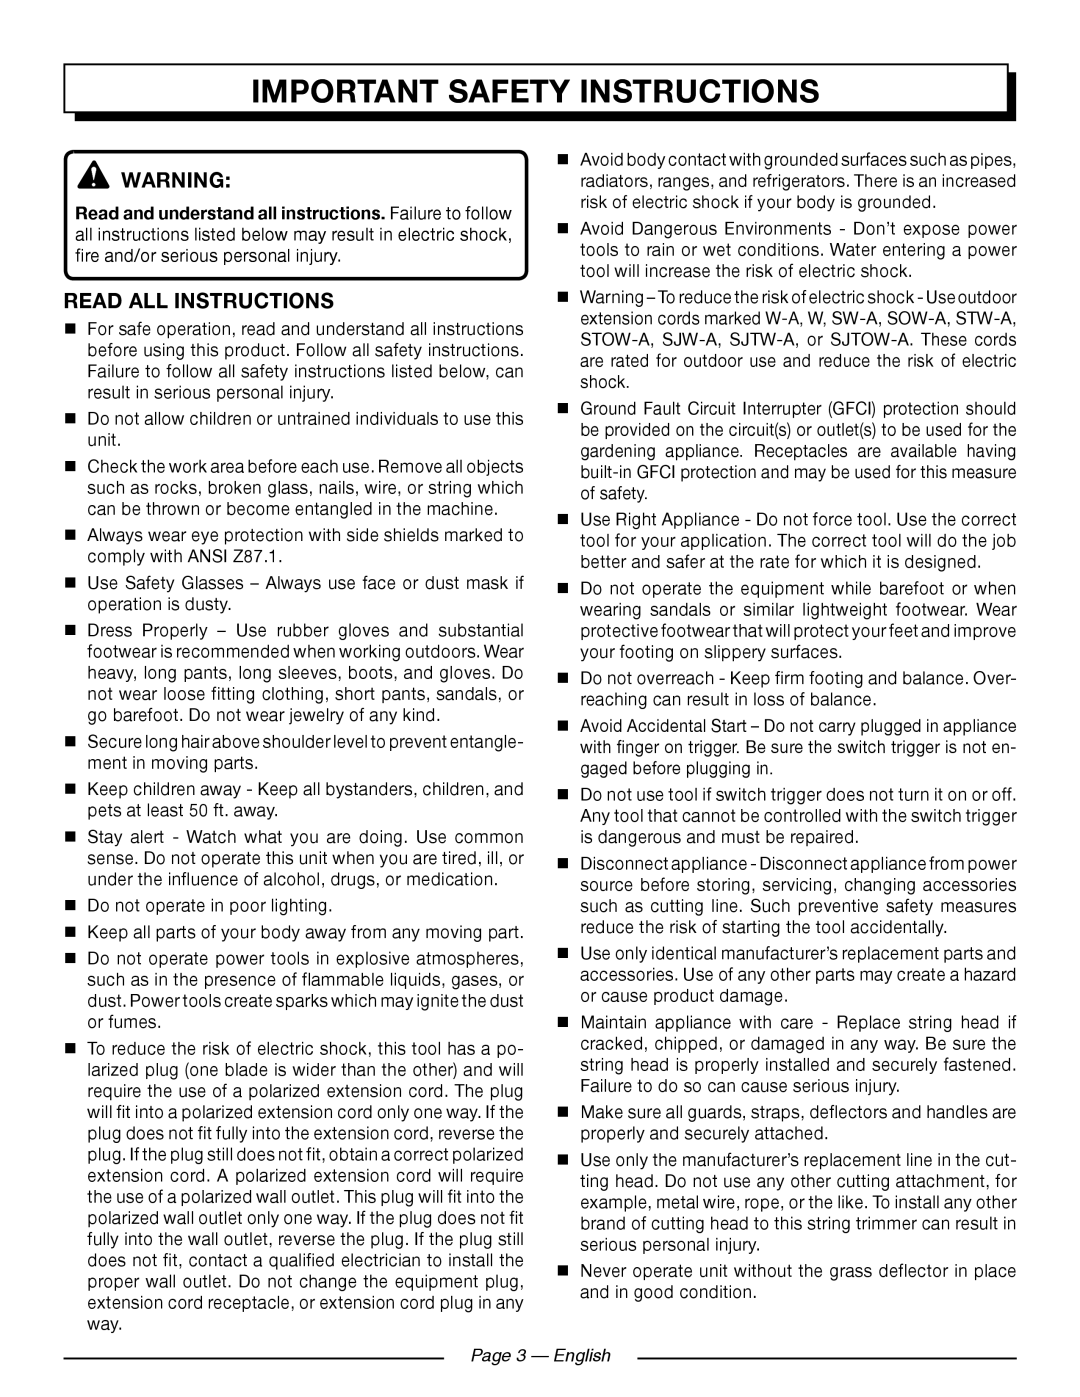 Homelite UT41121 manuel dutilisation Important Safety Instructions, Read All Instructions, Page 3 - English 